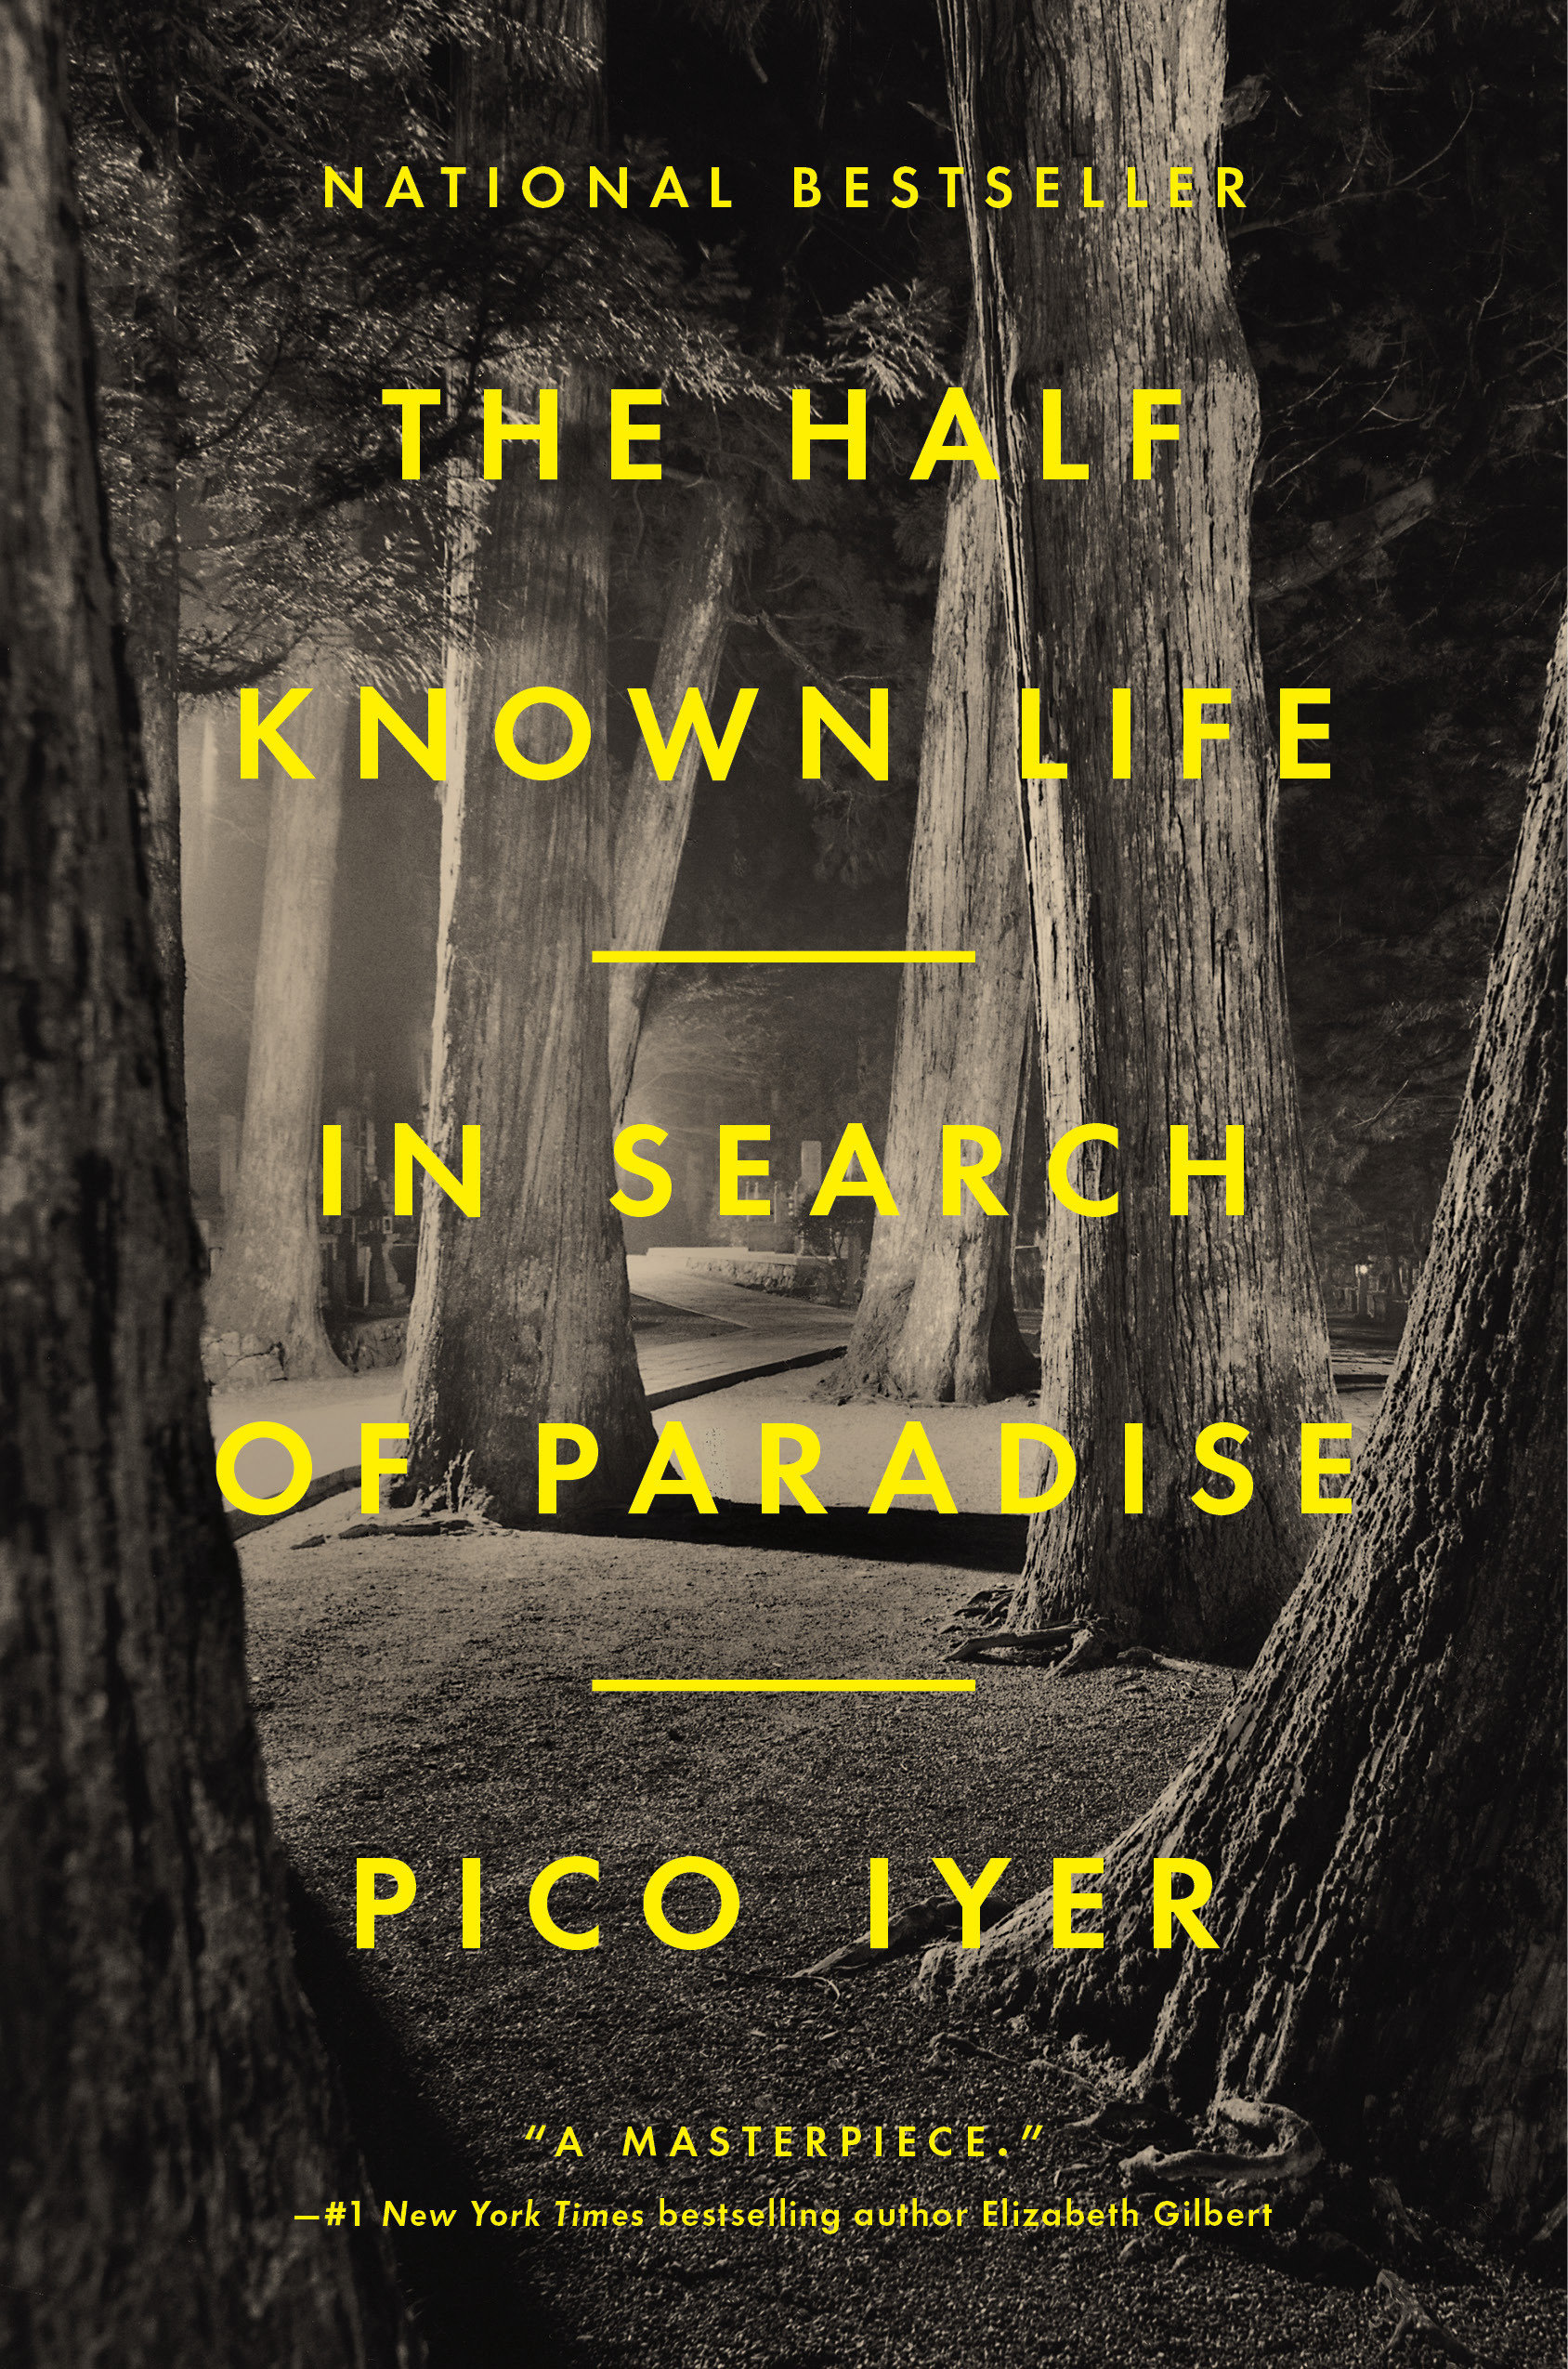 The half known life : in search of paradise